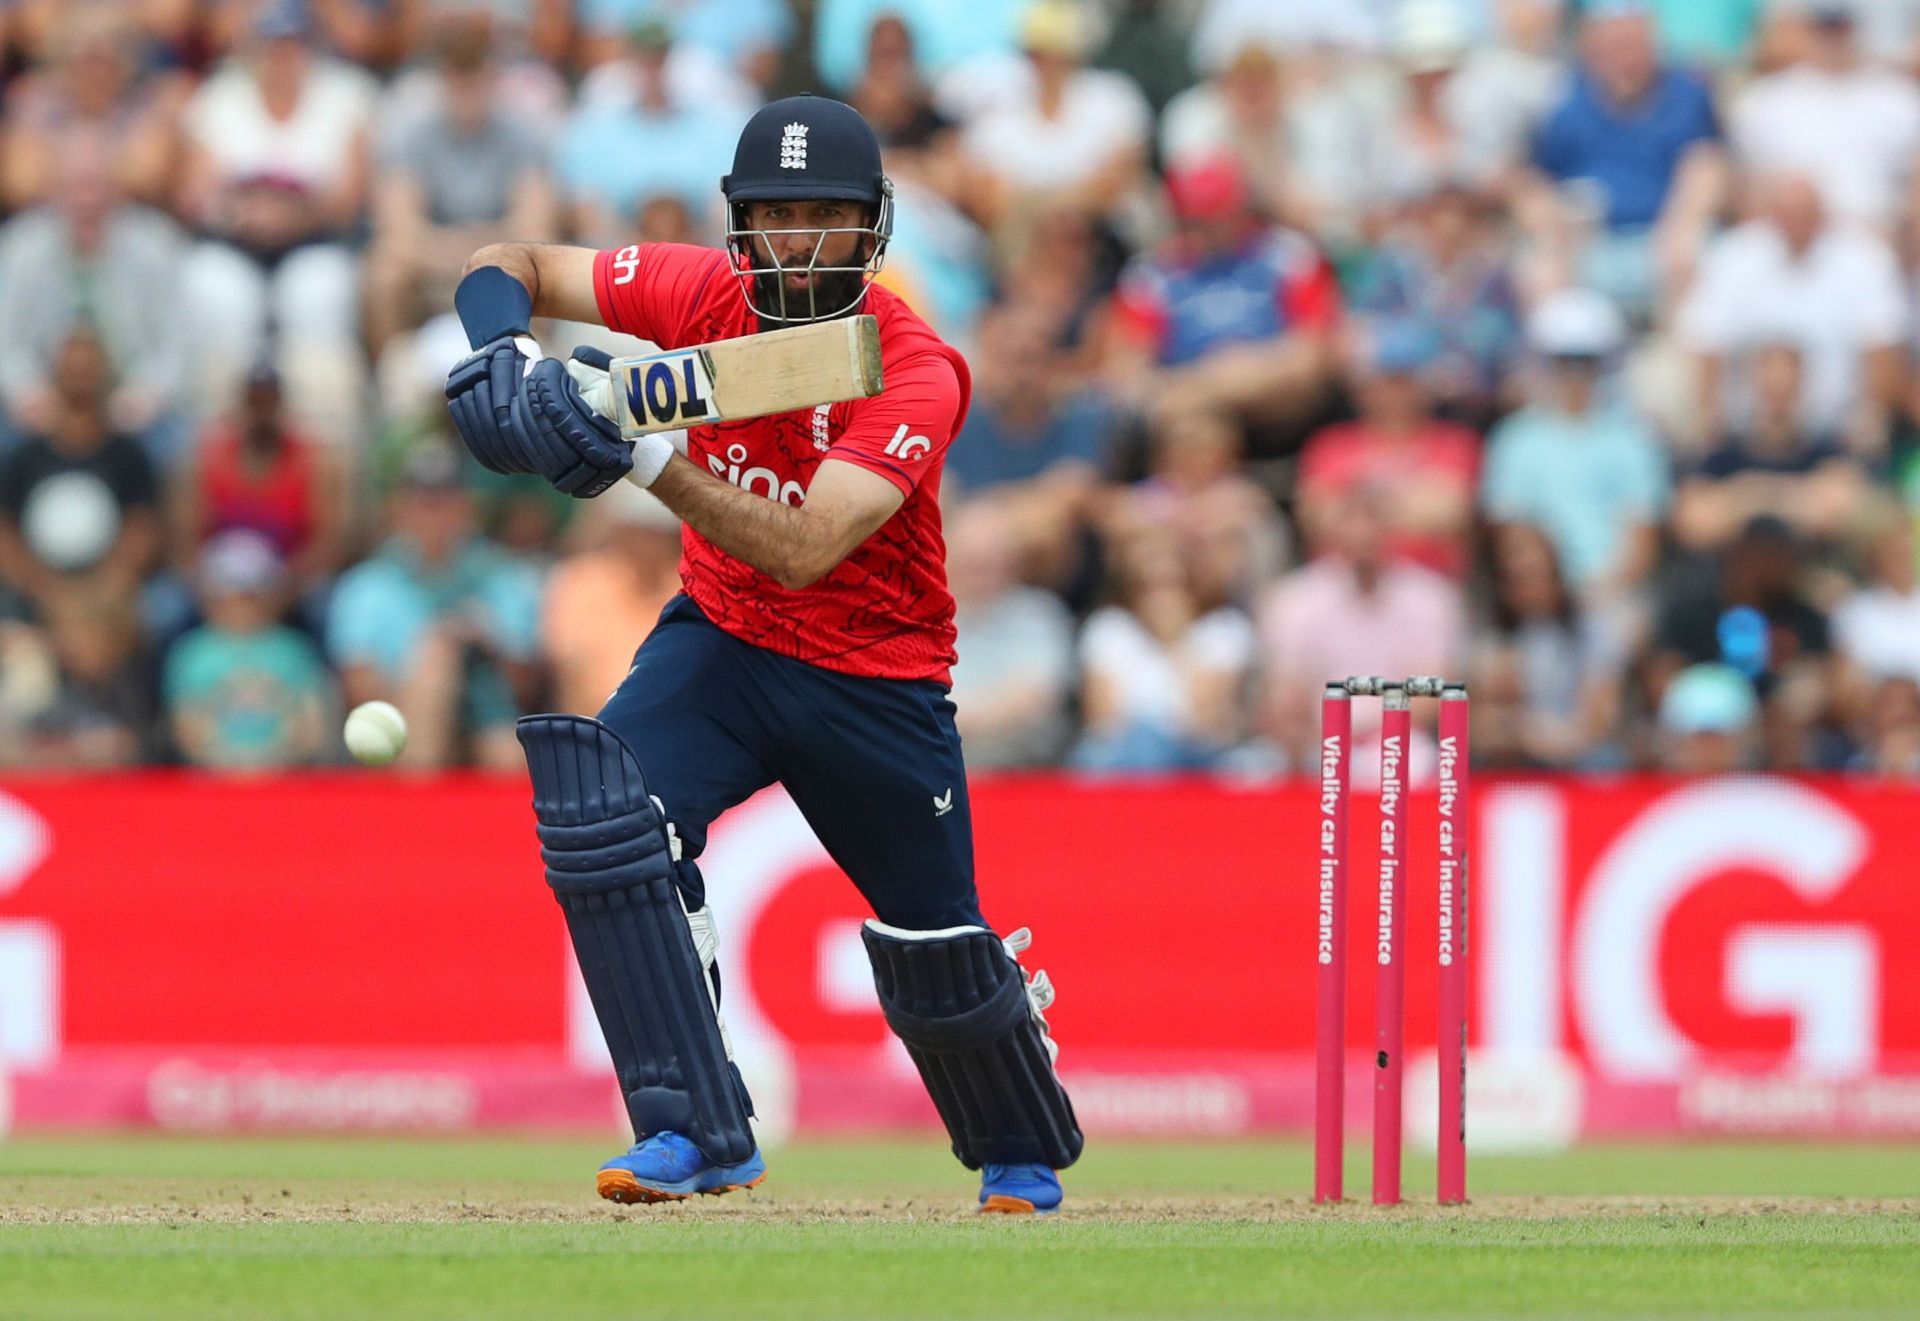 England v South Africa - Moeen Ali has been one of the better players for England